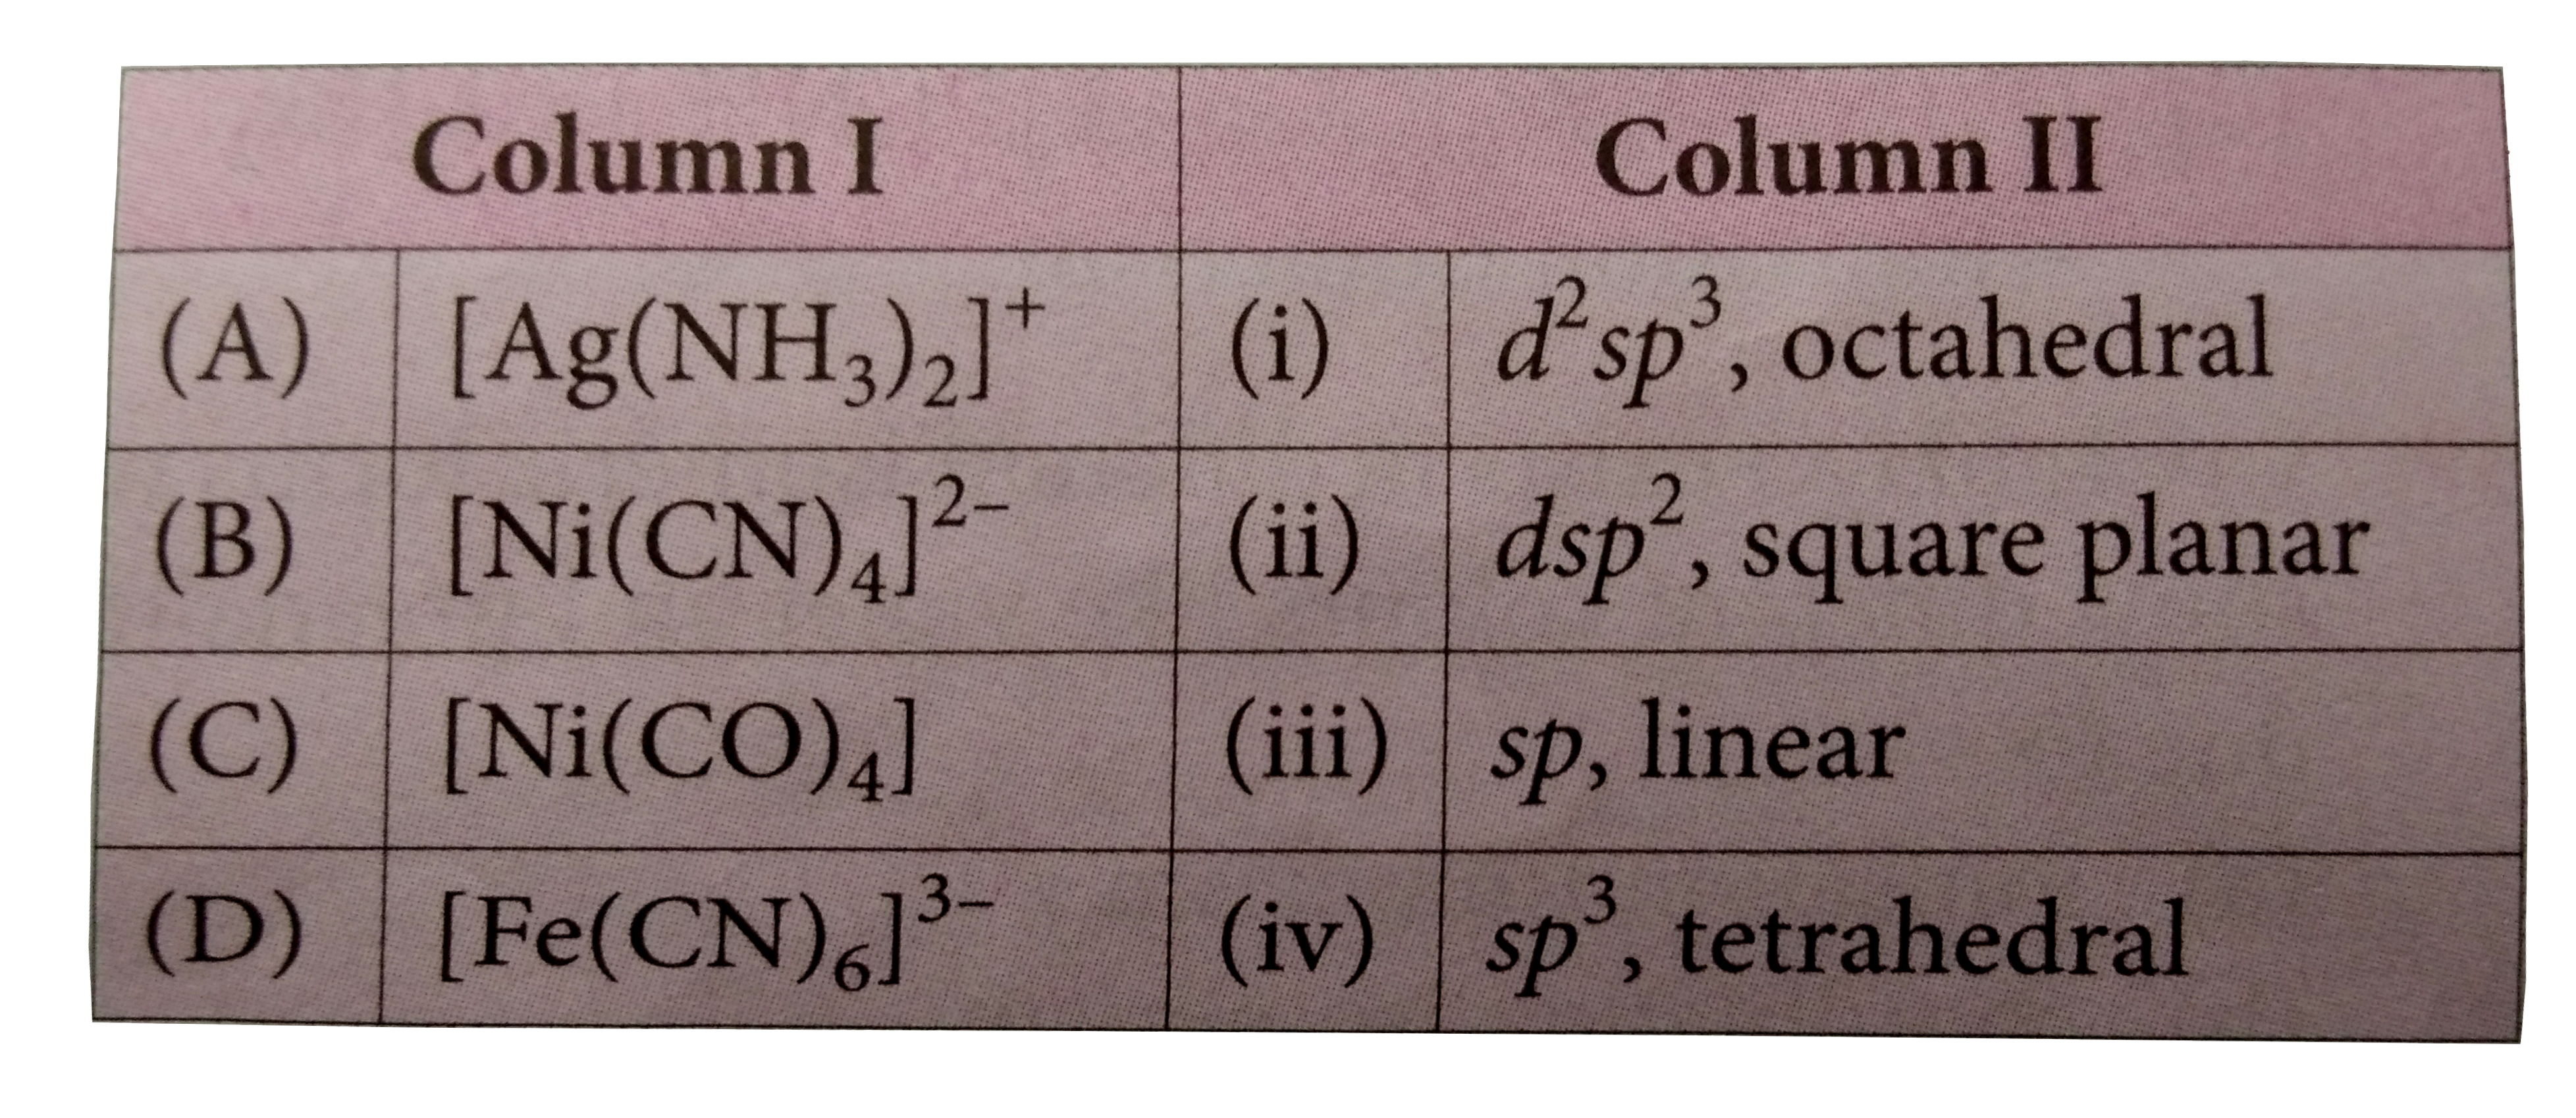 Match the examples given in column I with the shapes of the compounds given in column II and mark the appropriate choice .